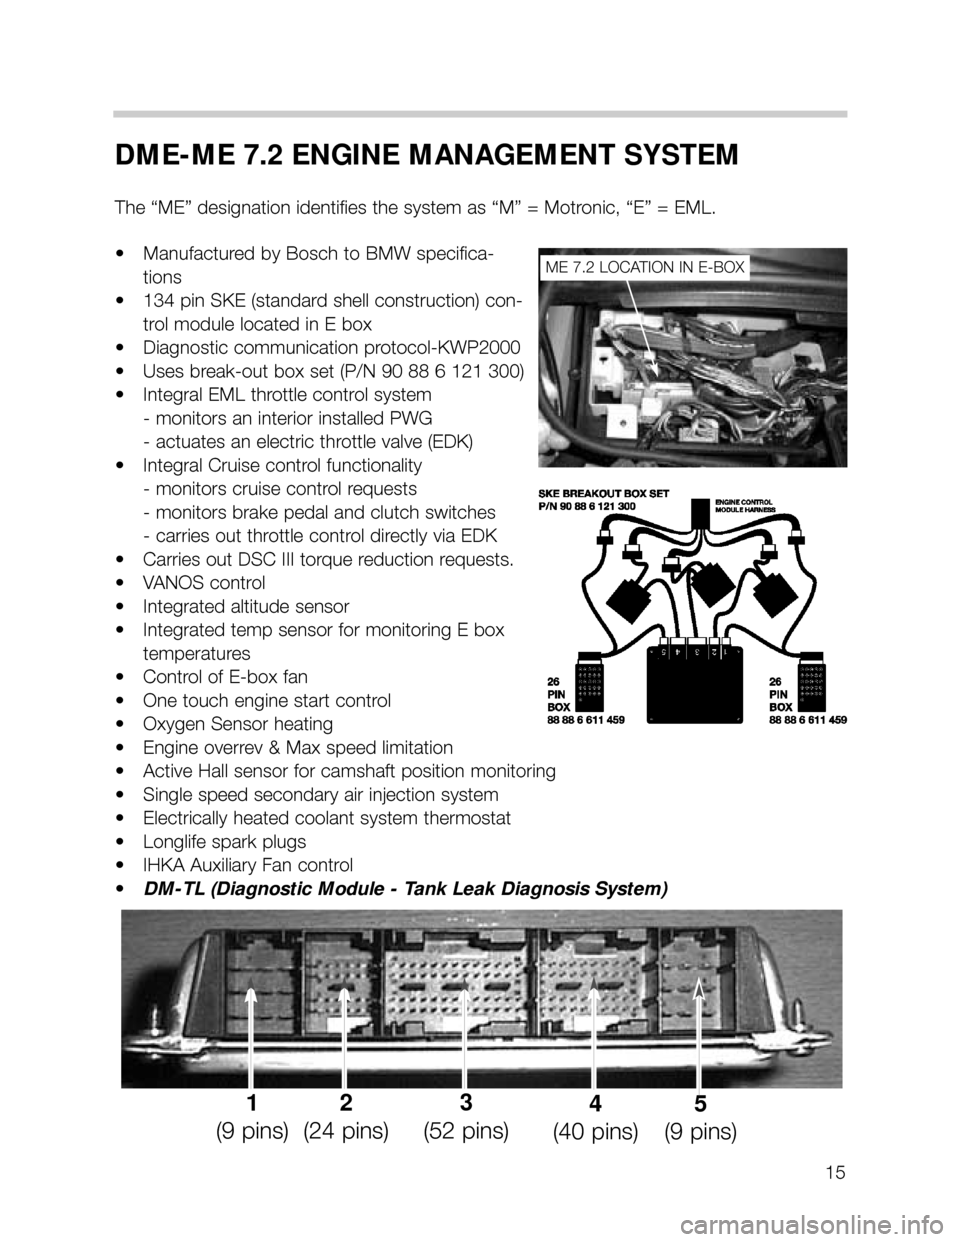 BMW X5 2001 E53 M62TU Engine Workshop Manual 15
DME-ME 7.2 ENGINE MANAGEMENT SYSTEM
The “ME” designation identifies the system as “M” = Motronic, “E” = EML.
• Manufactured by Bosch to BMW specifica-
tions
• 134 pin SKE (standard 